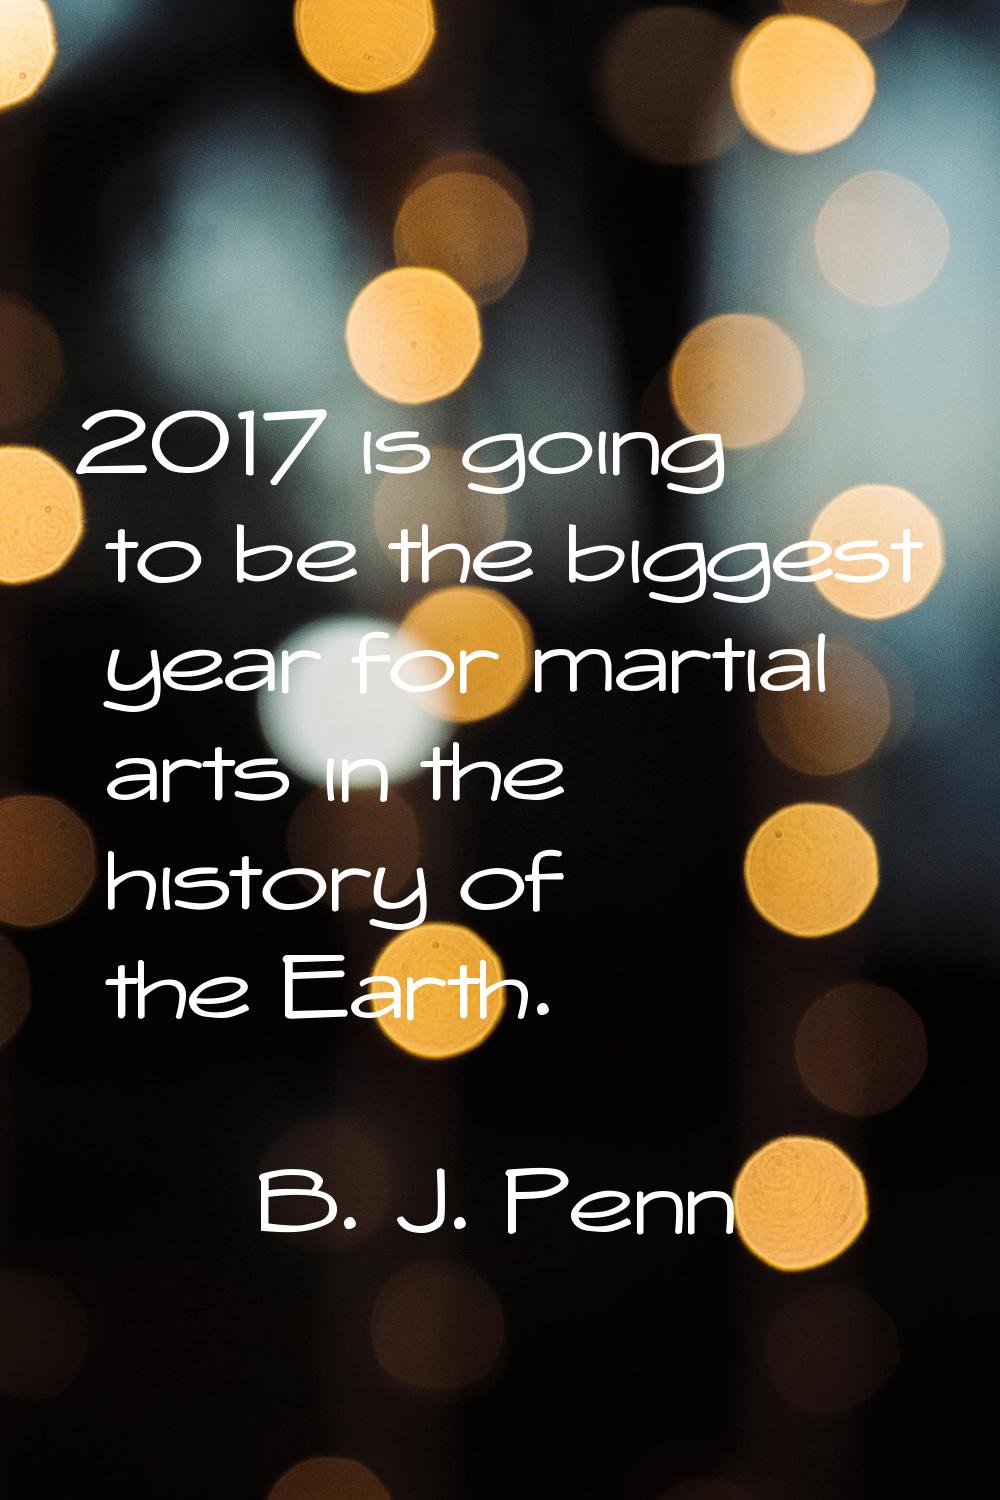 2017 is going to be the biggest year for martial arts in the history of the Earth.